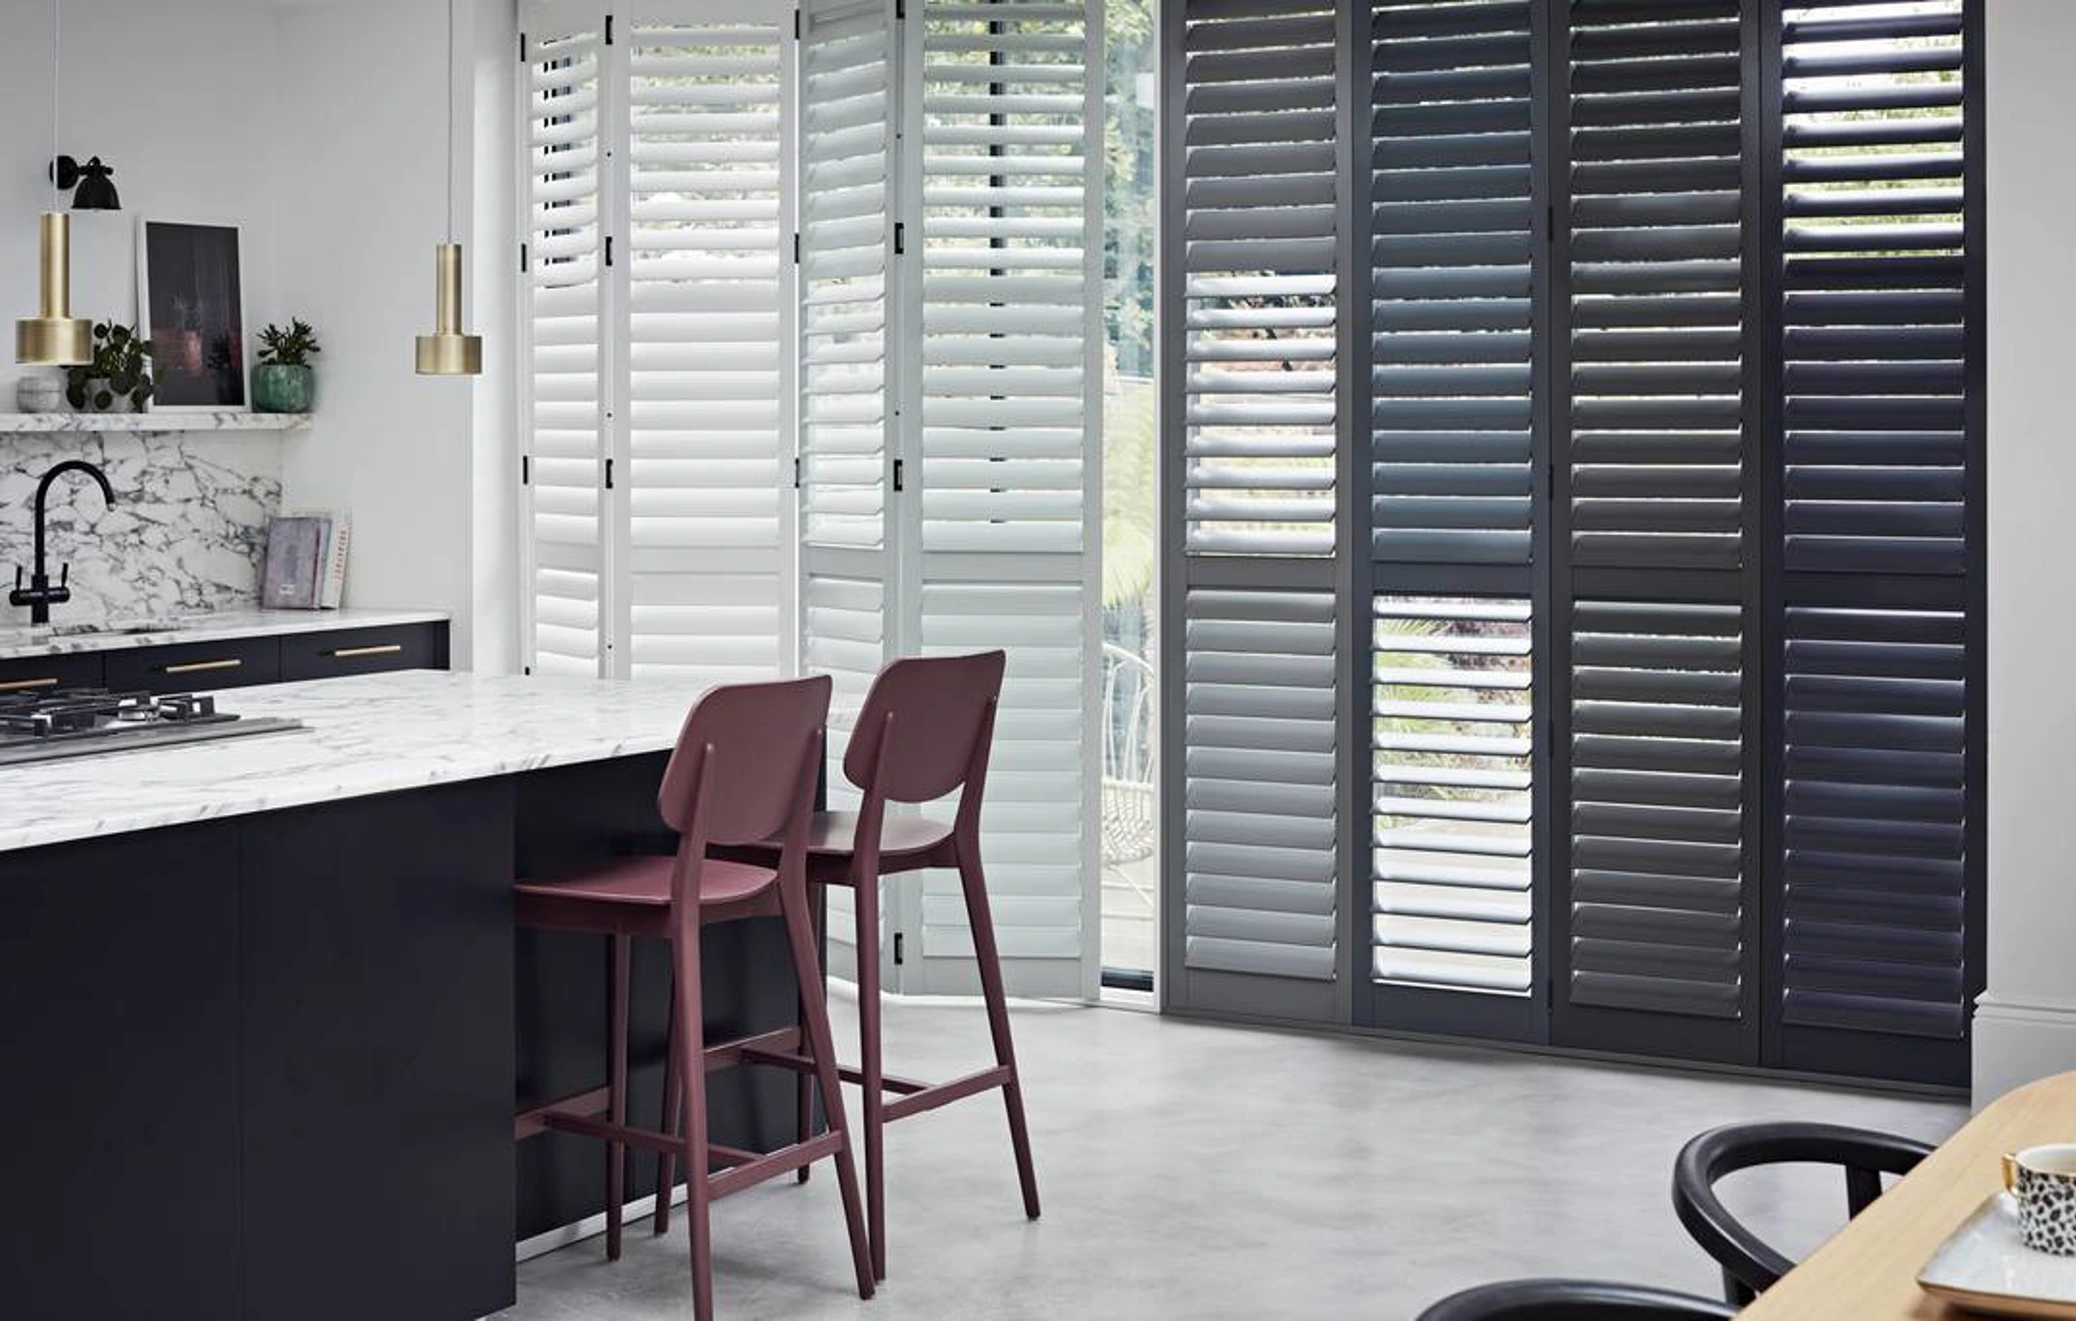 Sliding patio doors with white and grey wooden shutters in kitchen